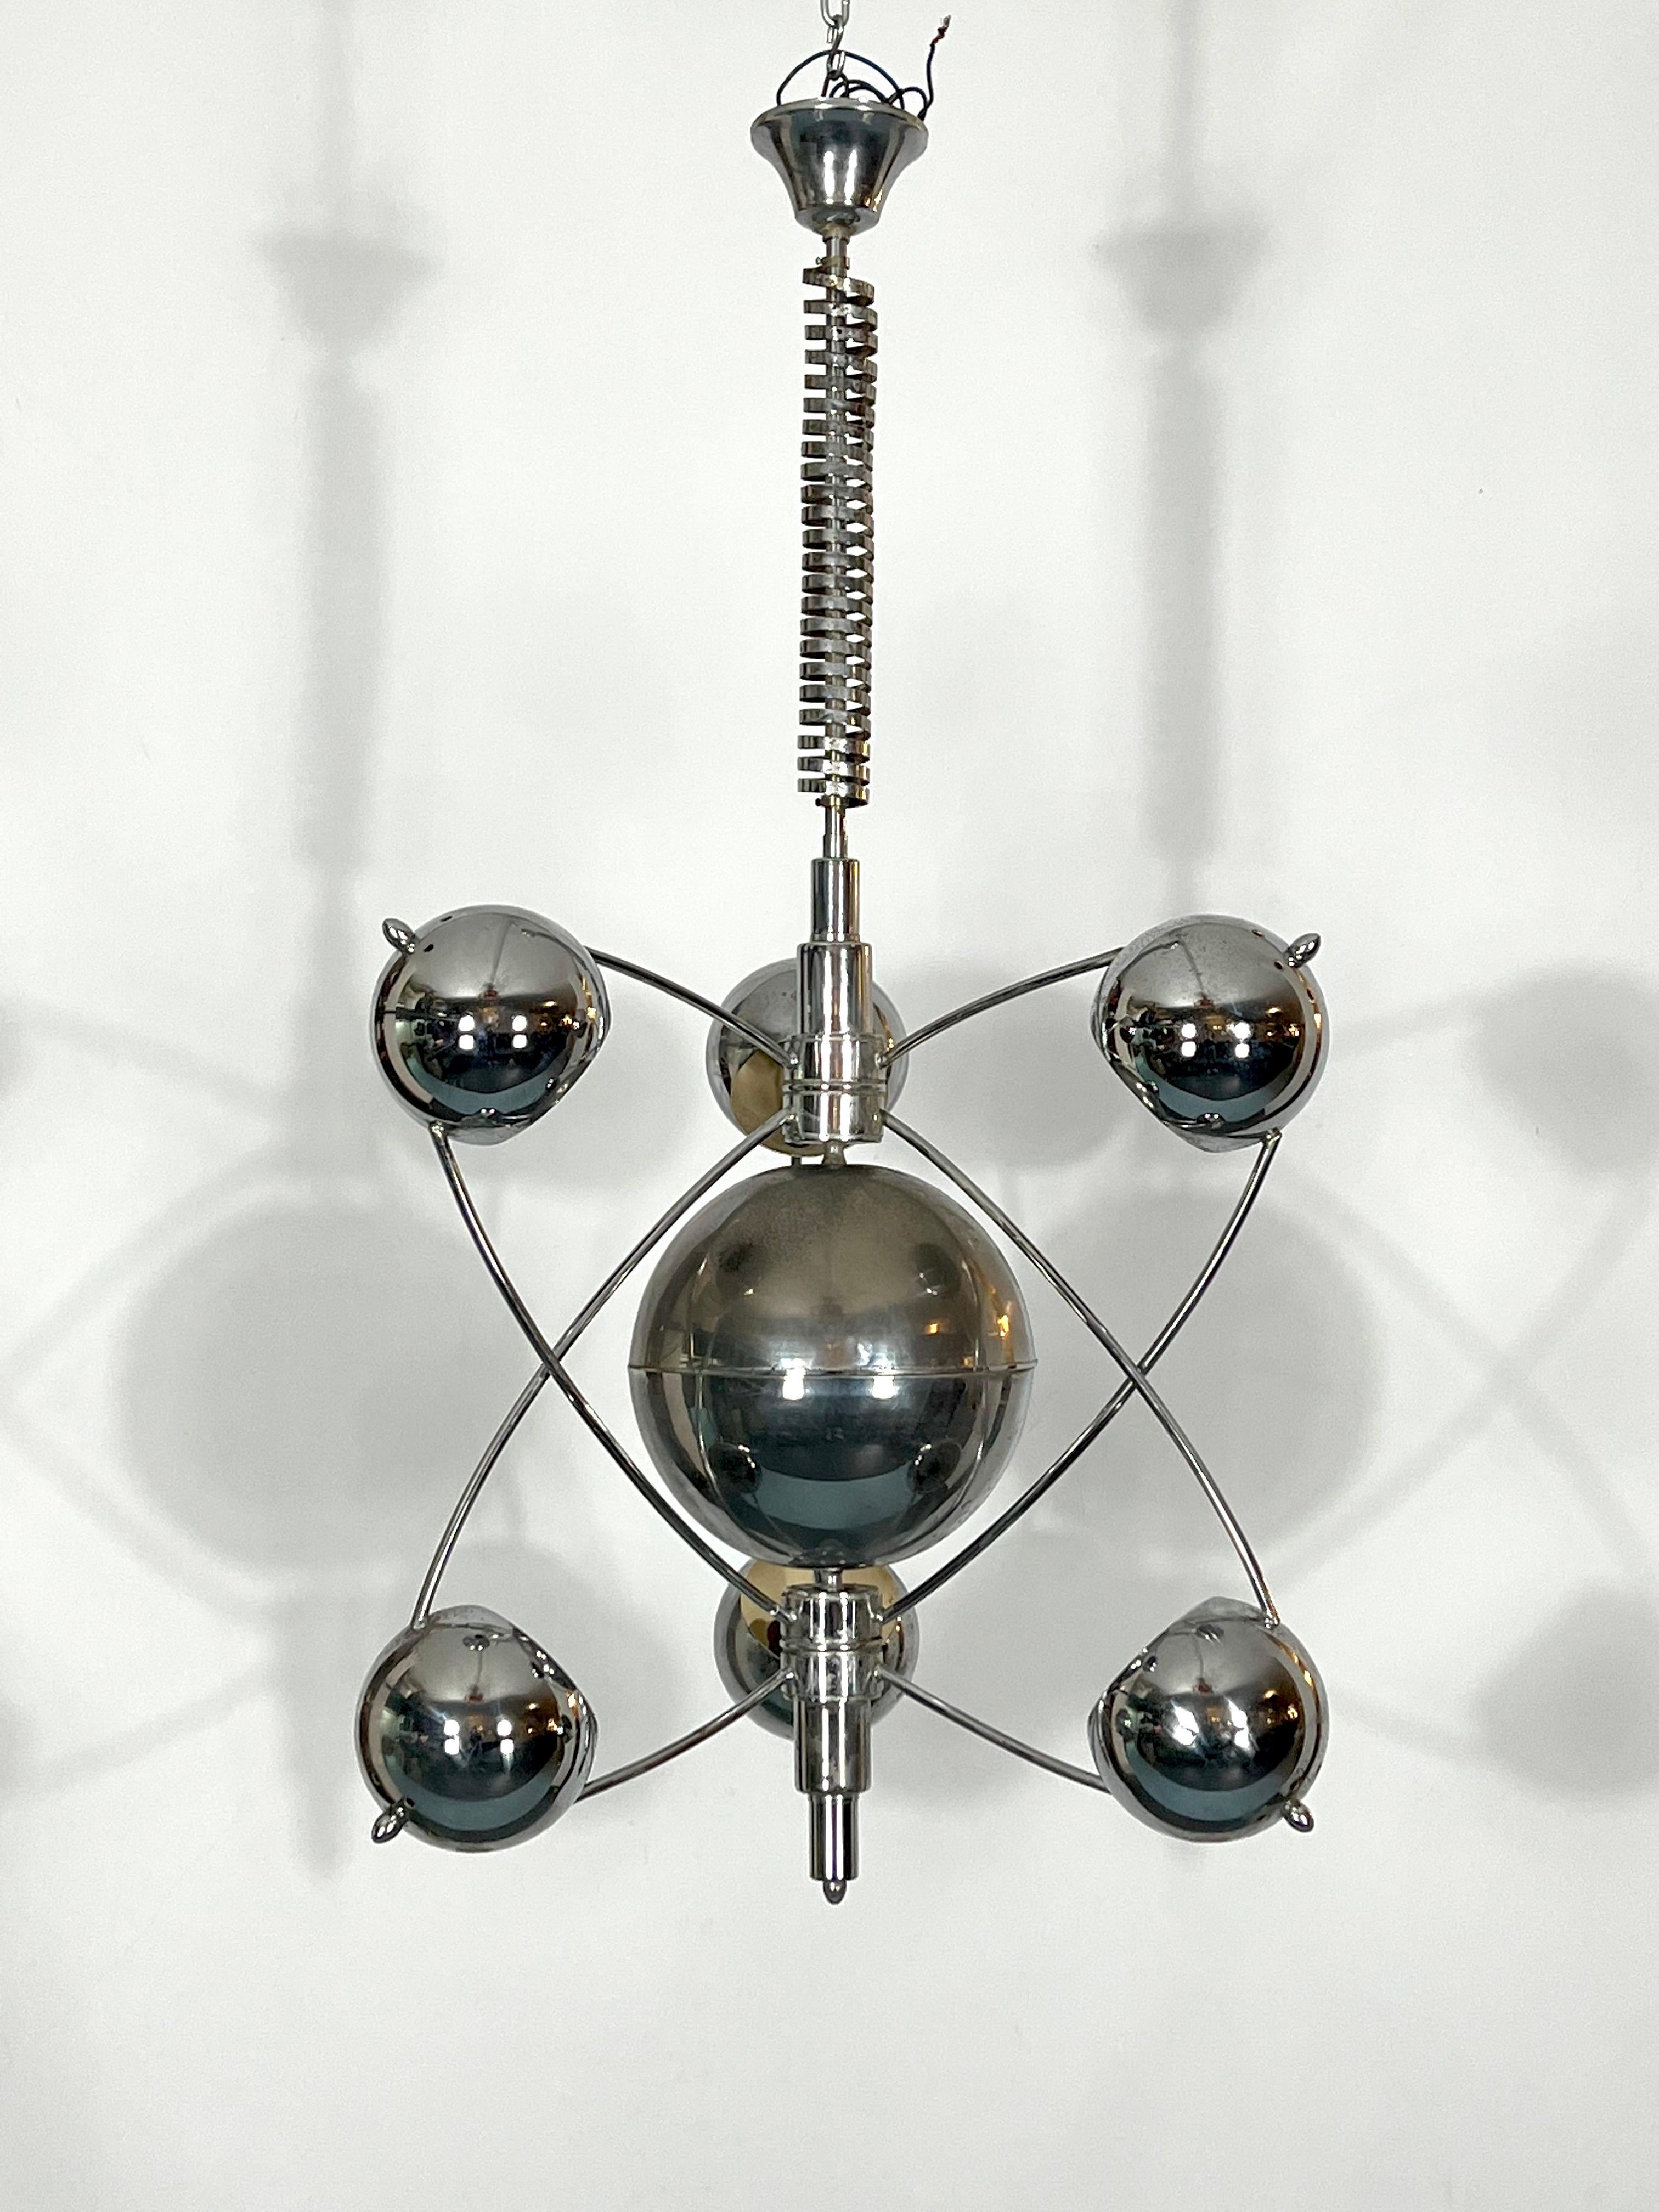 Vintage condition with trace of age and use for this chandelier produced by Reggiani during the 50s. Oxidation on the metal as shown in the images. Full working with EU standard, adaptable on demand for USA standard.